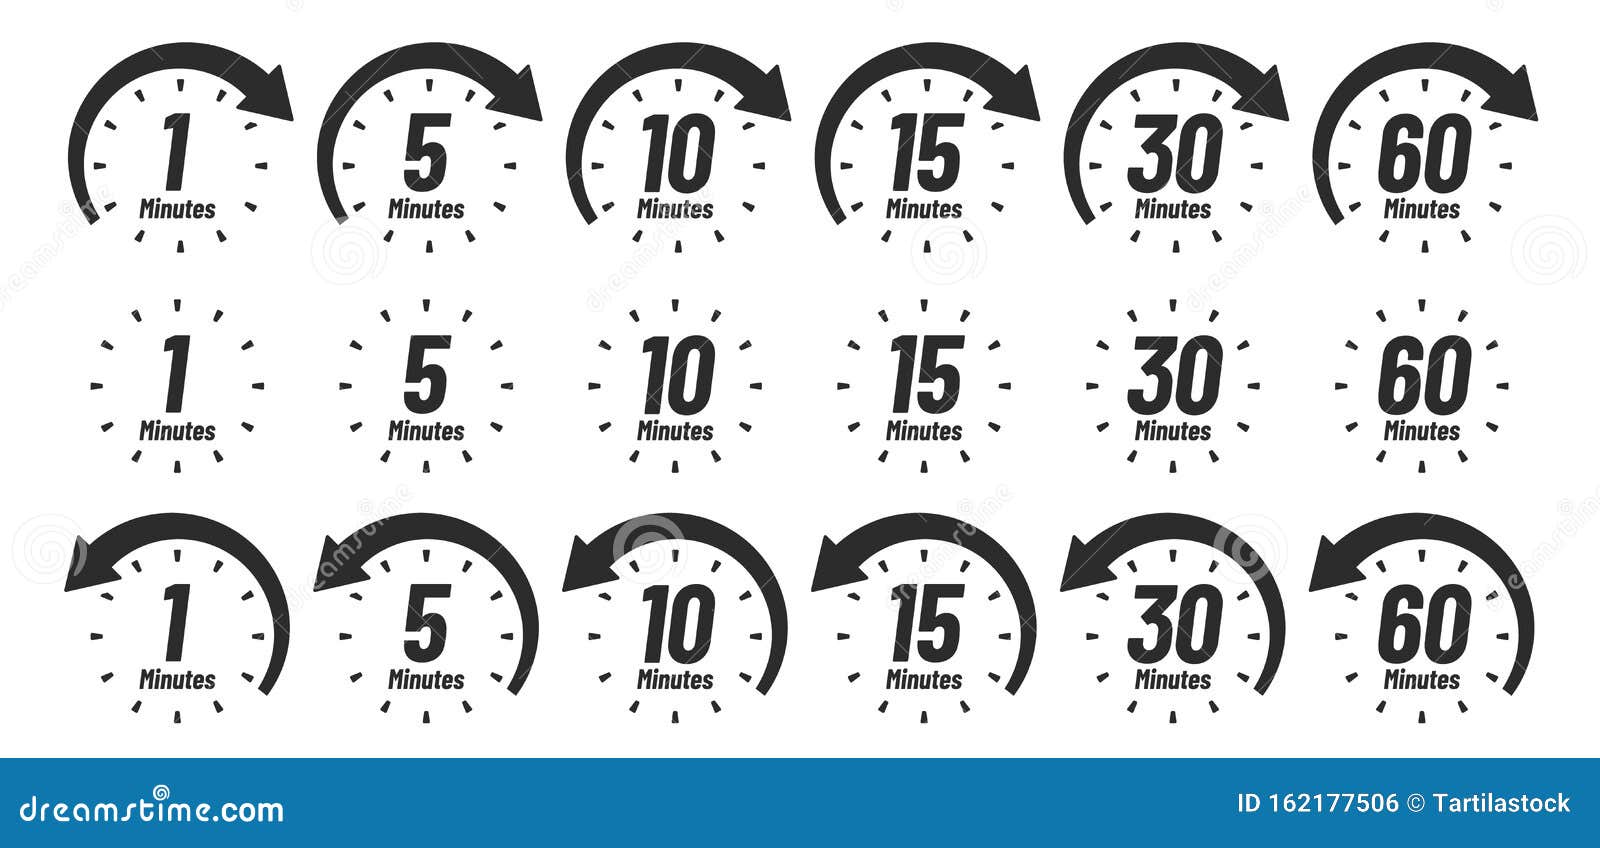 minutes time icon. analog clock icons, 1 5 10 15 30 60 minute clocks and minutes ago sign  set